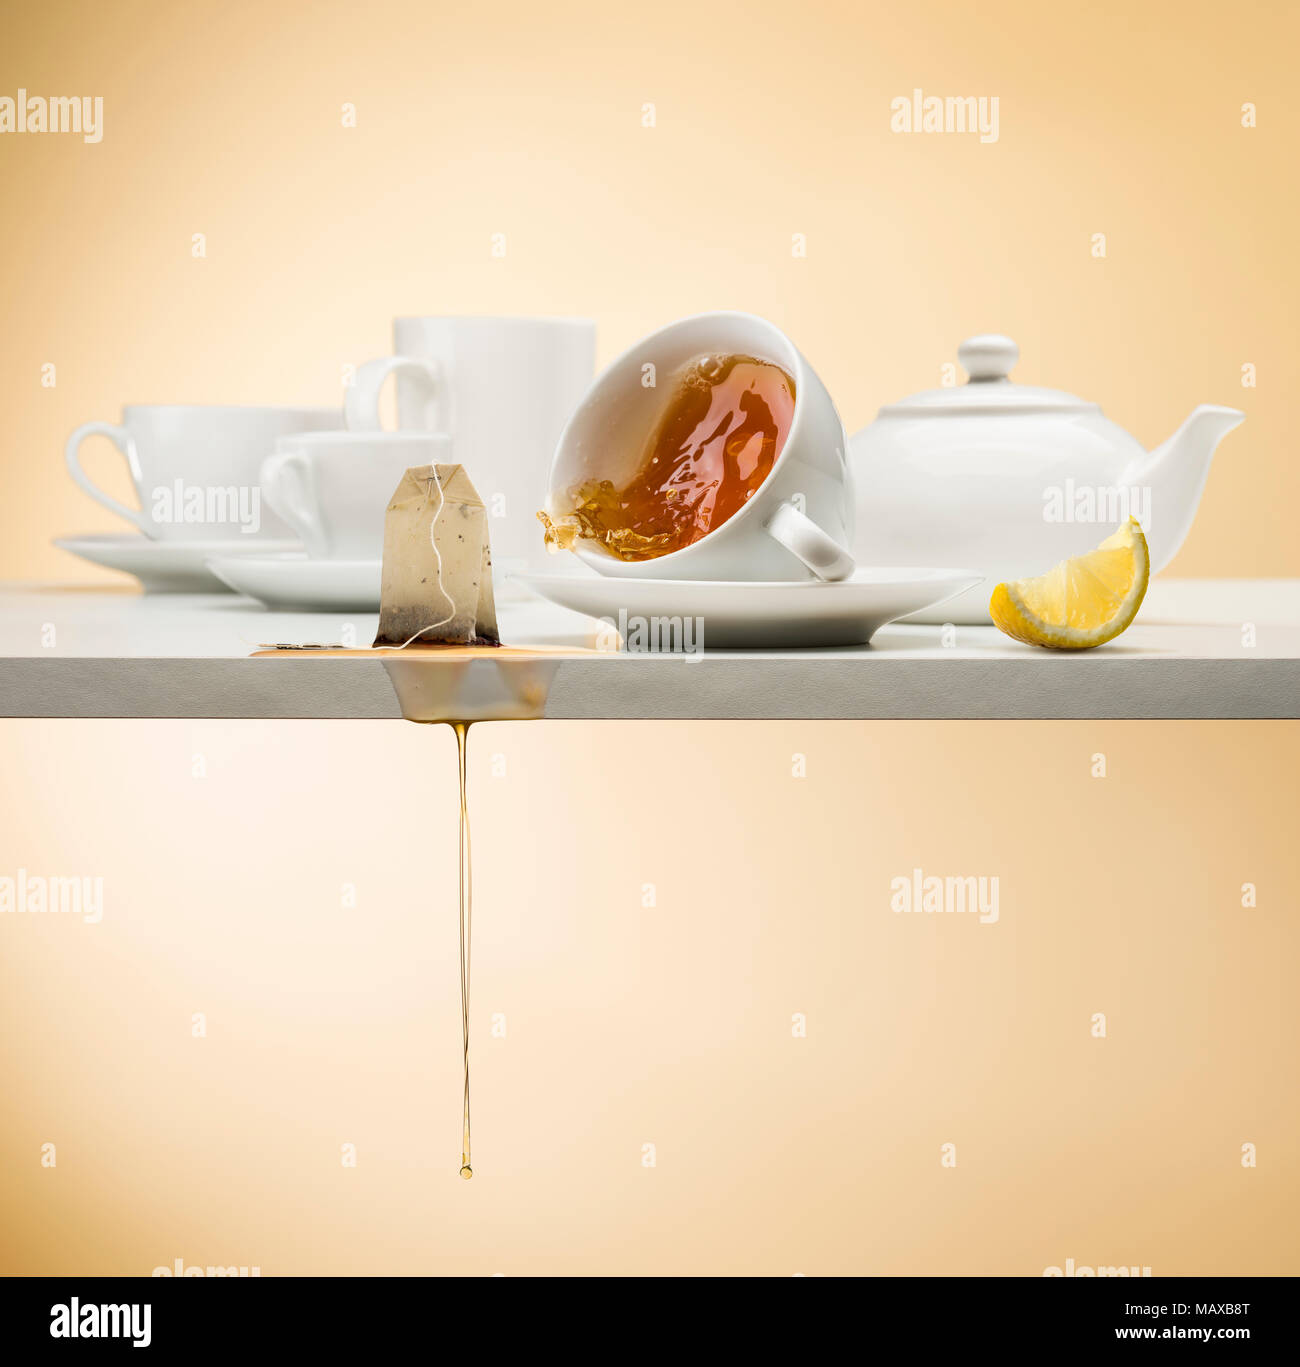 falling cup of tea on white table with tea bag dripping and lemon slice Stock Photo